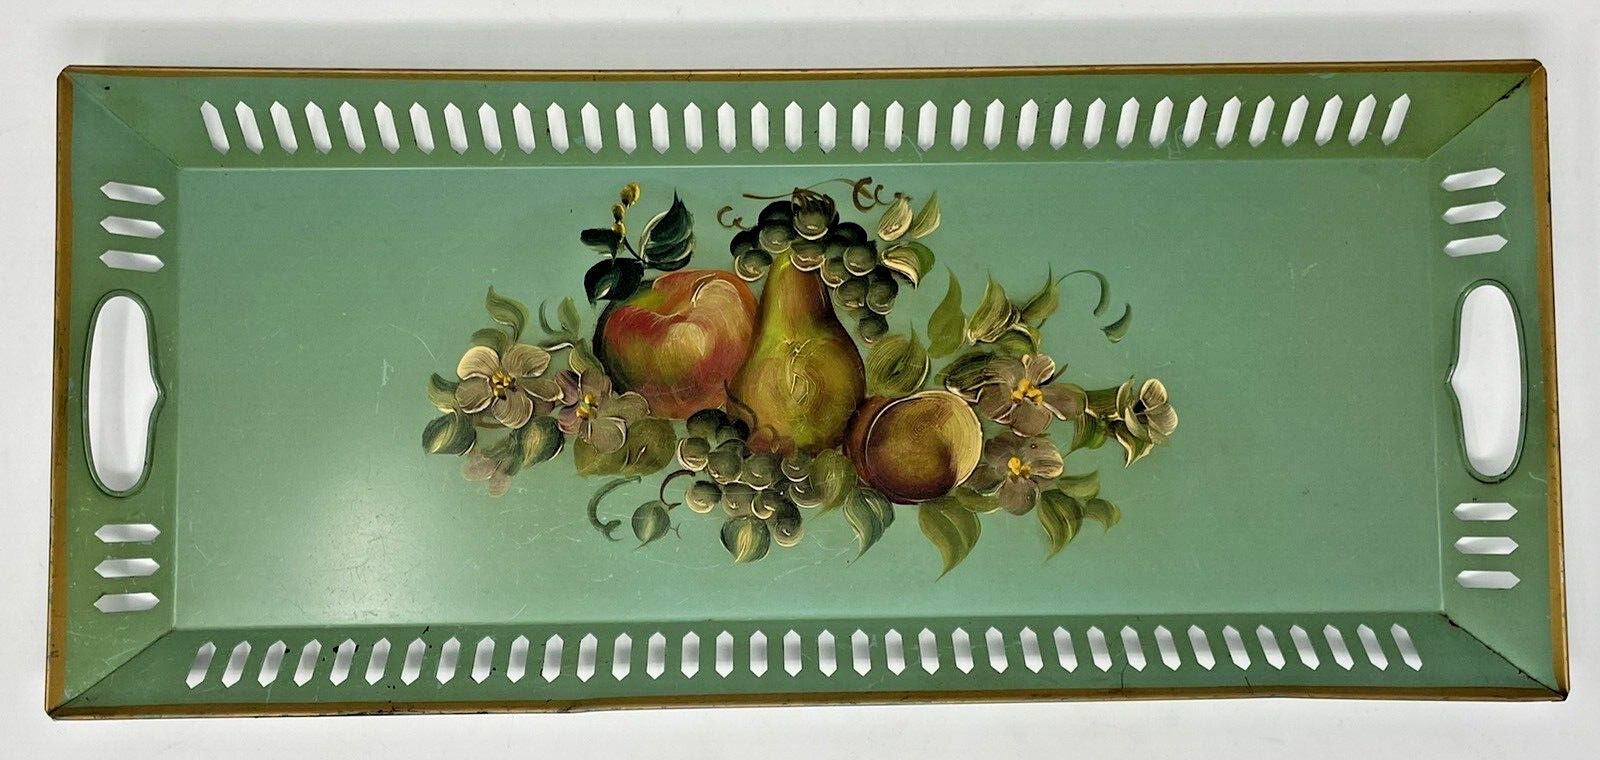 Vintage Toleware Tray Green Painted Fruit Long Rectangular 21.75 x 9.5